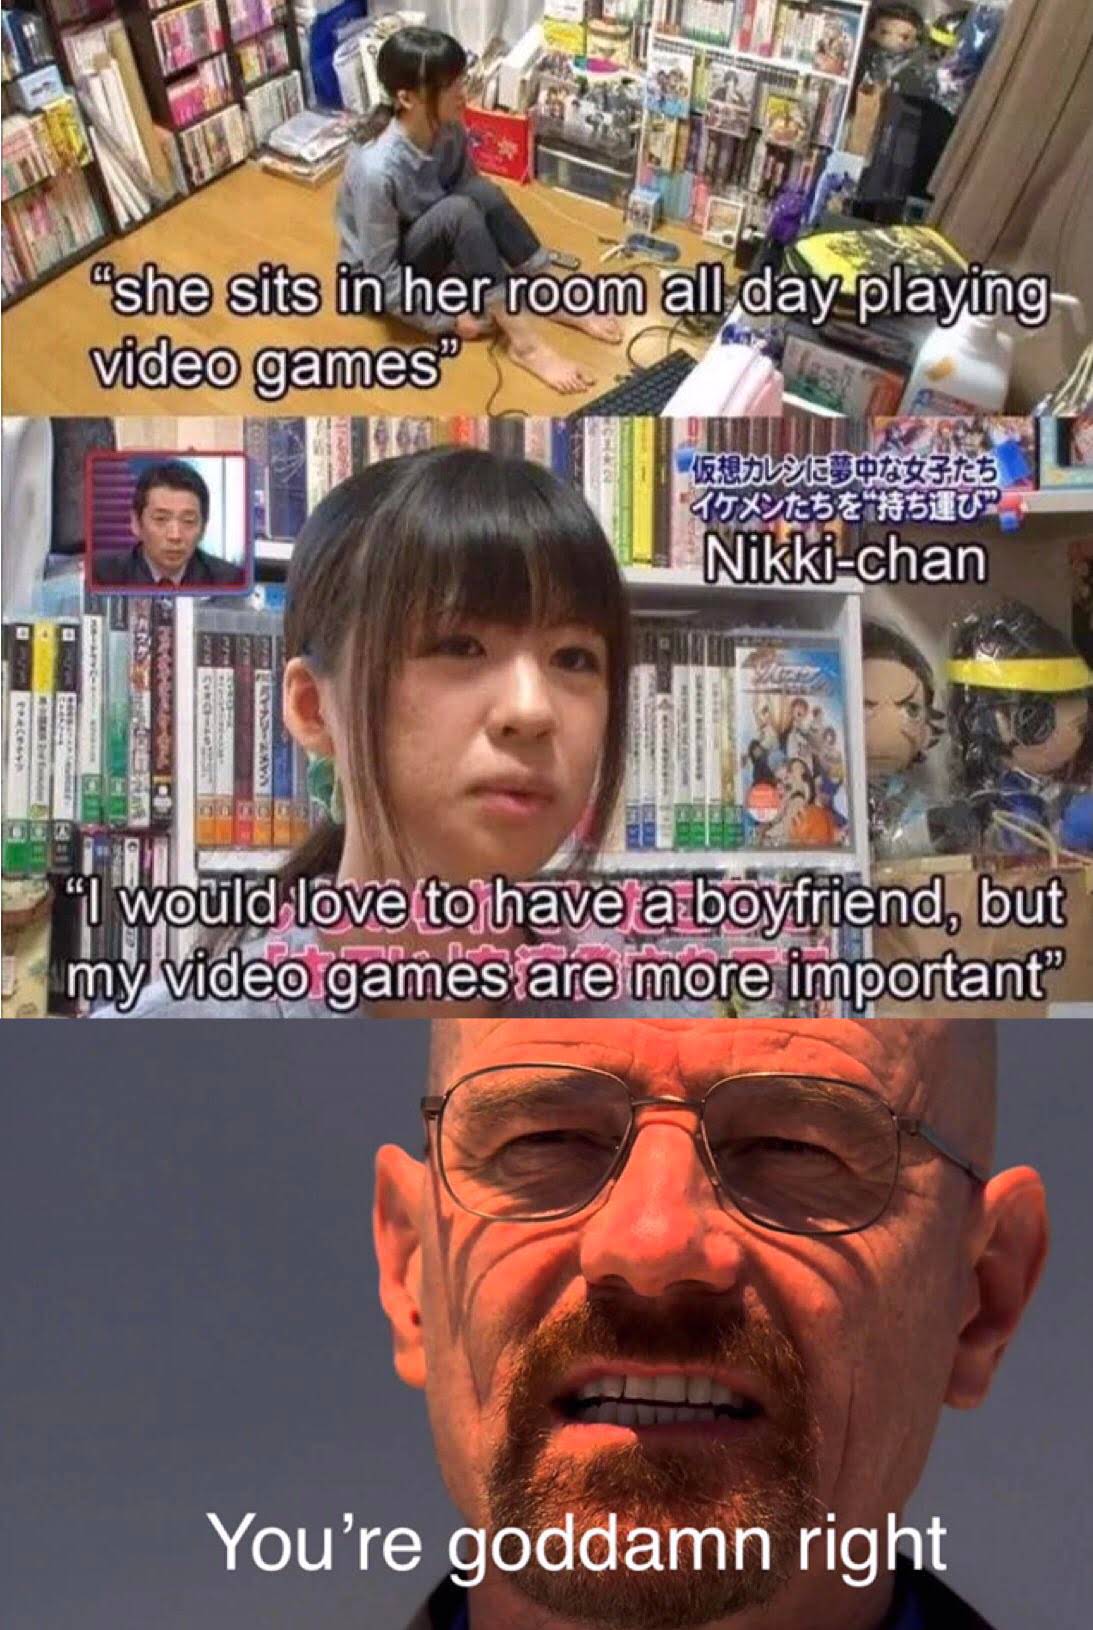 dank memes - she sits in her room all day playing video games - "she sits in her room all day playing video games" Nikkichan 19 Peces Port of Vaktsi "I would love to have a boyfriend, but my video games are more important" You're goddamn right